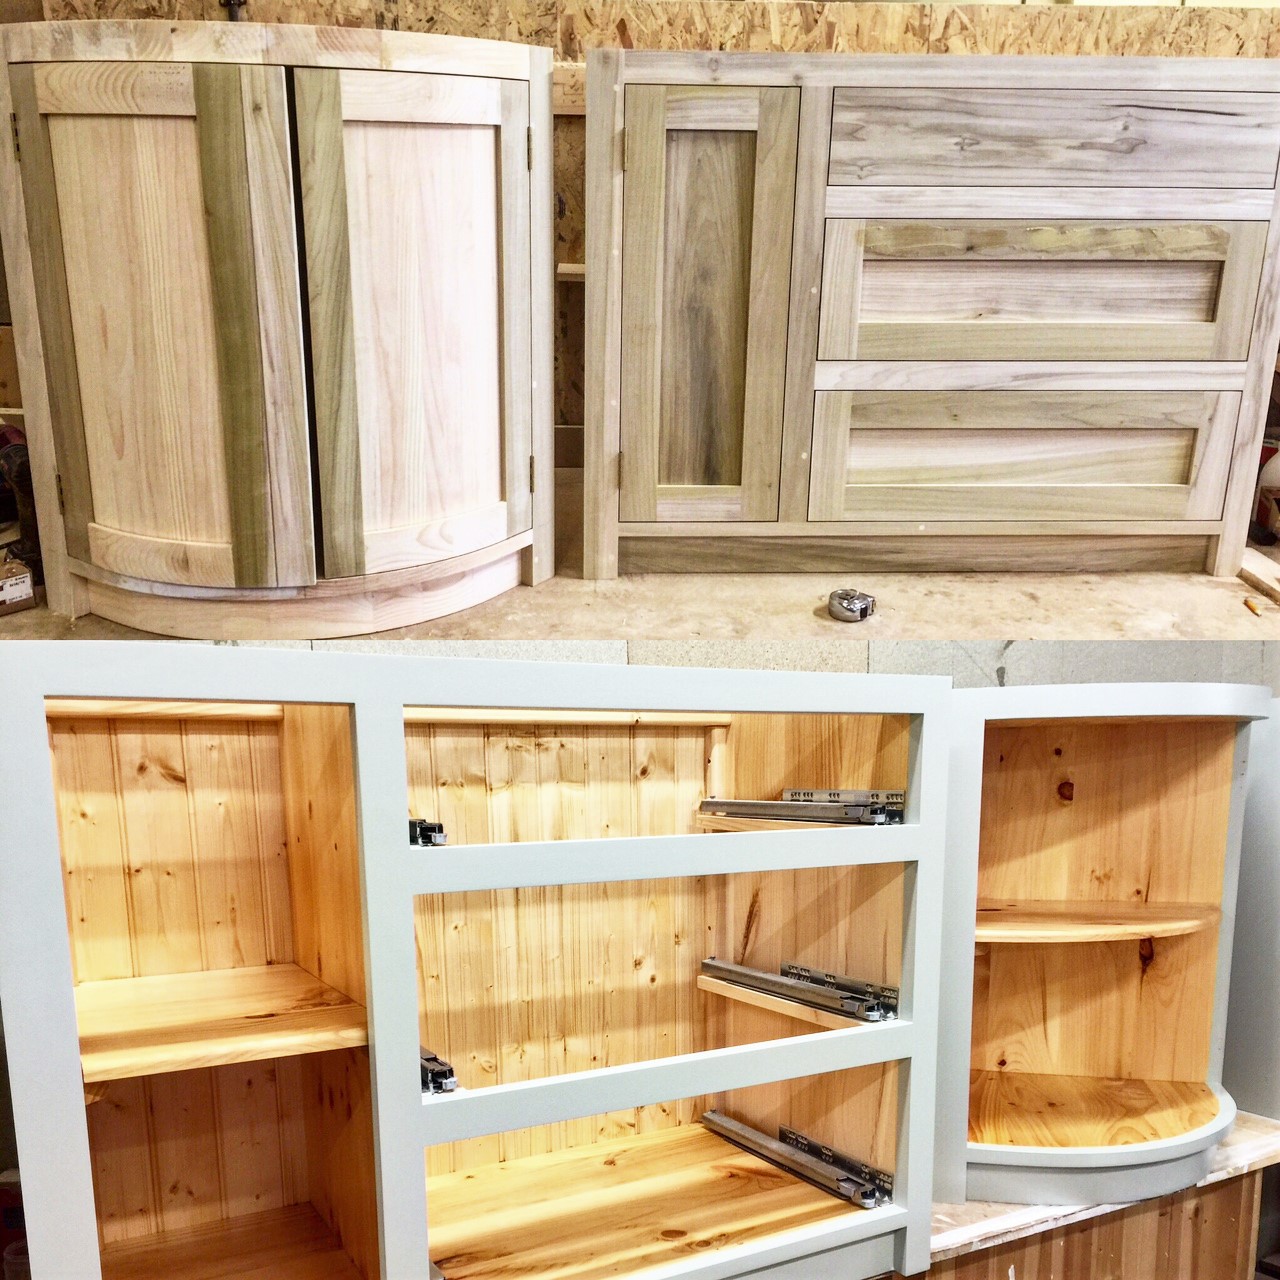 Selection of our fully bespoke, hand made, solid wood kitchen furniture in a tailor made shaker style.